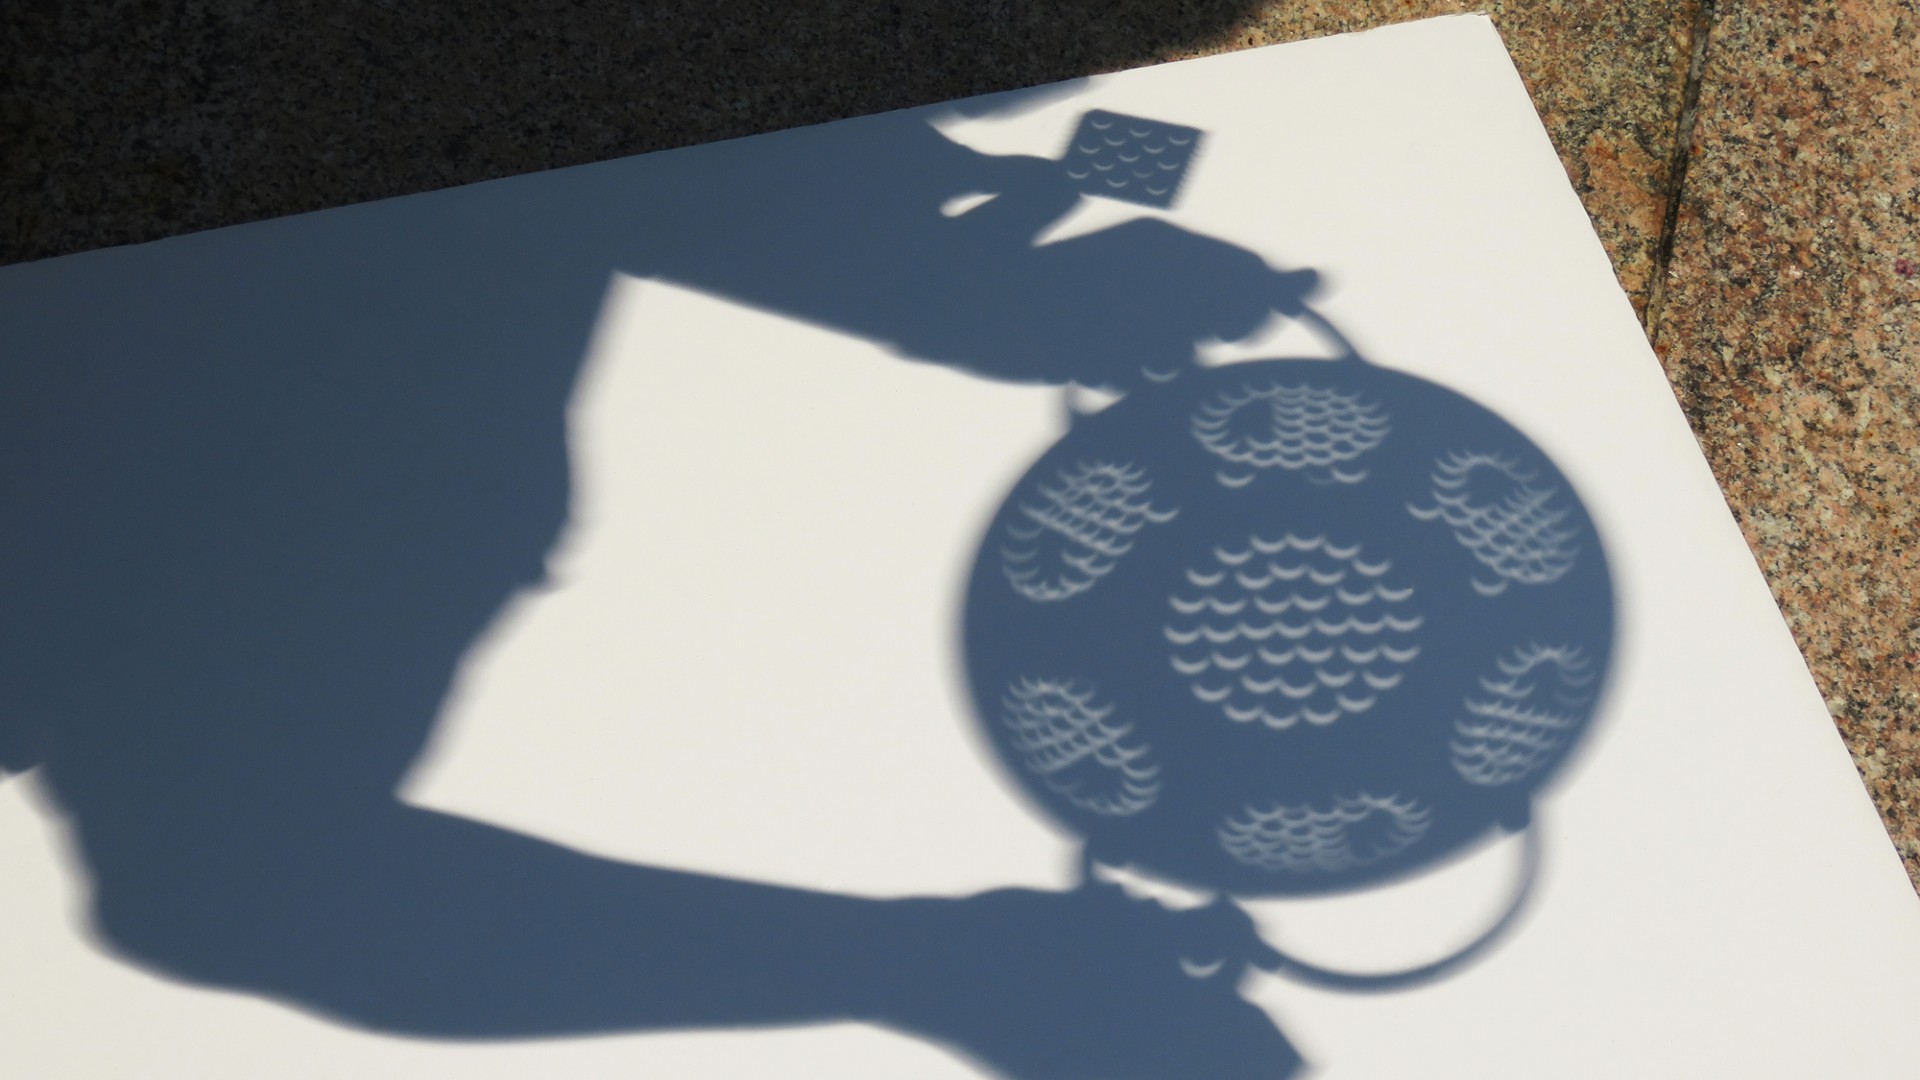 tiny half-moon shapes can be seen in the holes in the shadow of a colander held by two hands